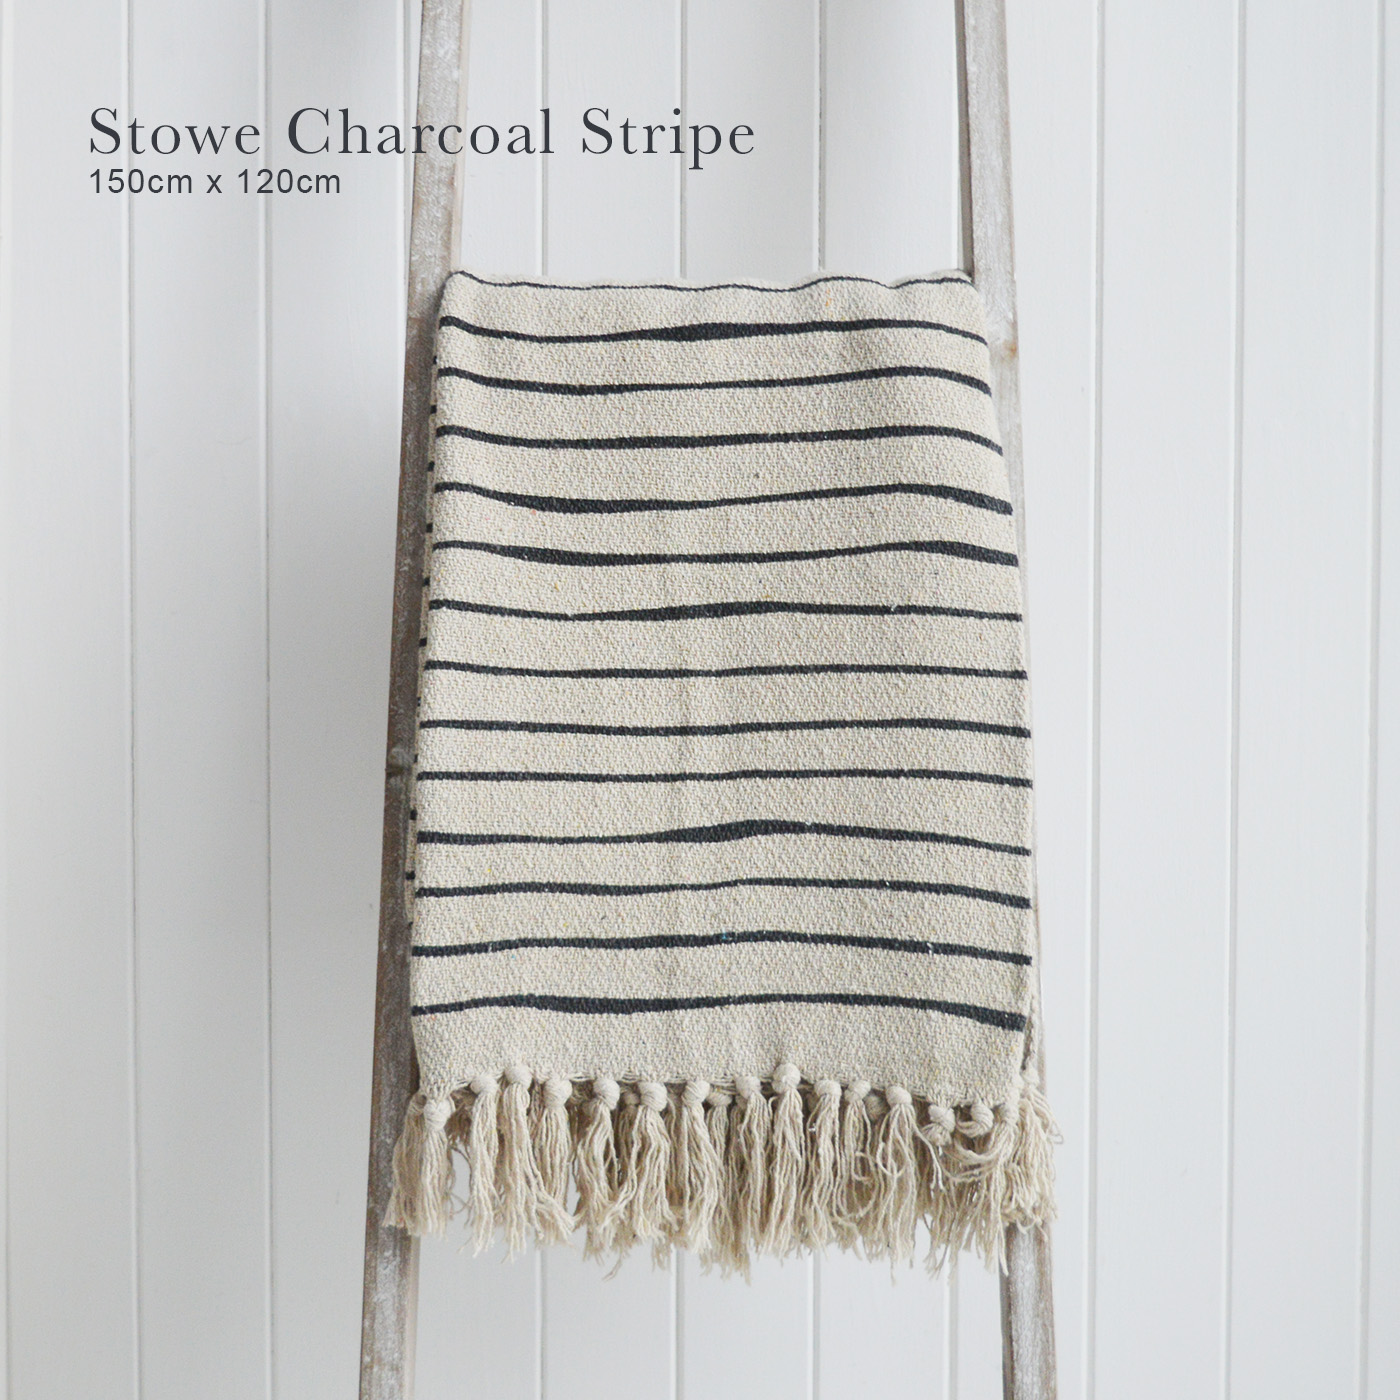 Stowe throws in blues, greys and natural coloures  for interiors in New England styles modern farmhouse, country, coastal and city homes - Charcoal Stripe